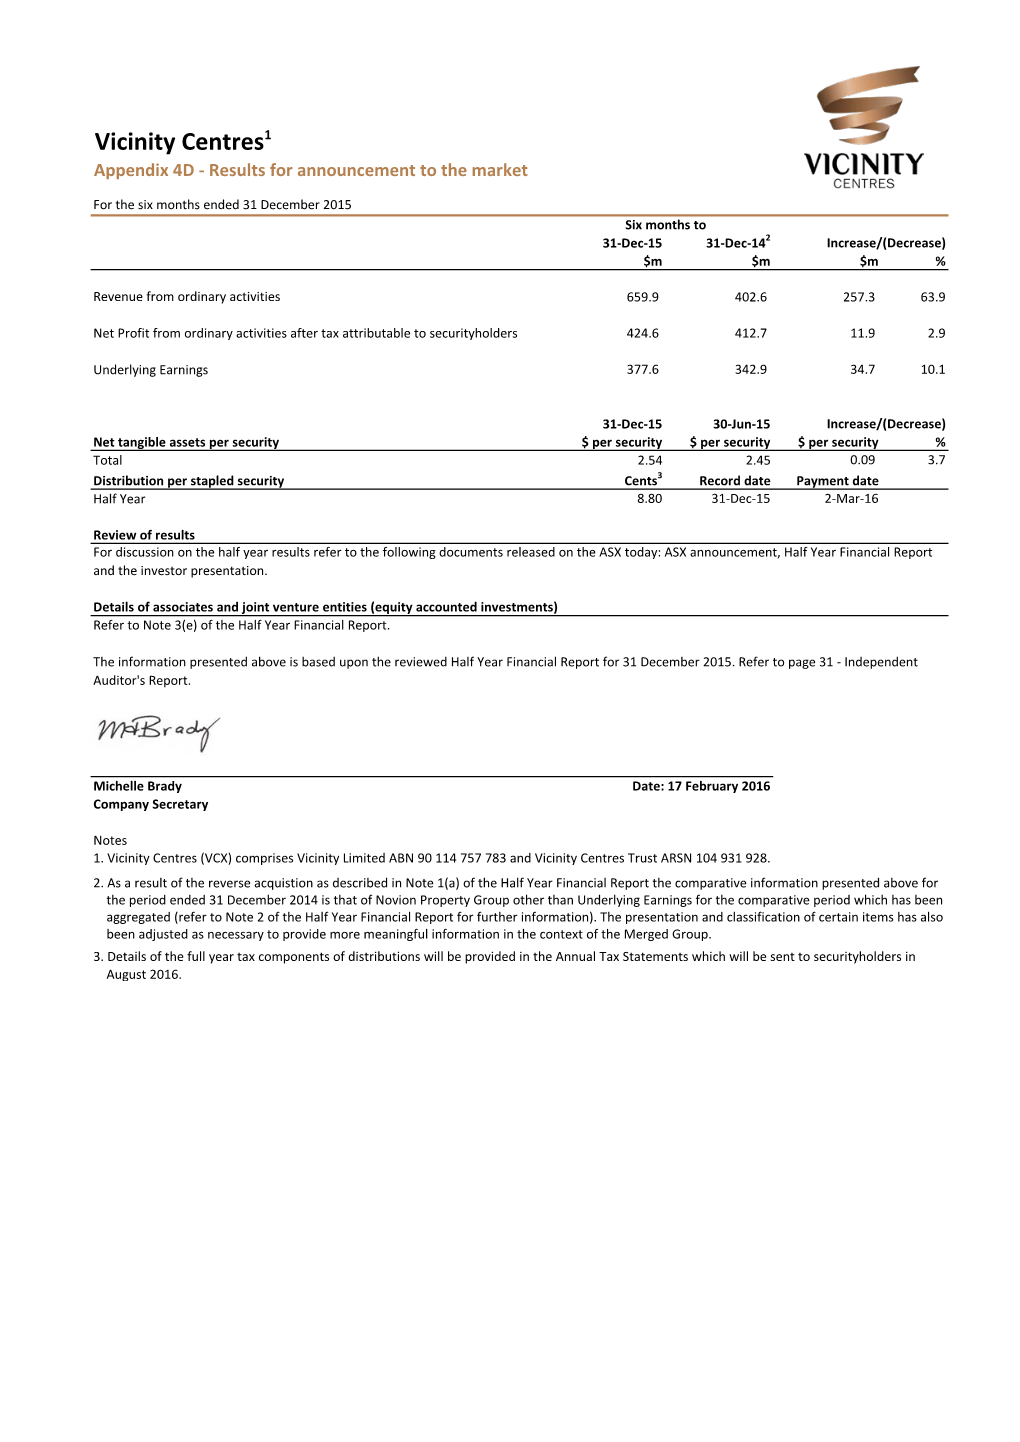 Vicinity Centres1 Appendix 4D - Results for Announcement to the Market